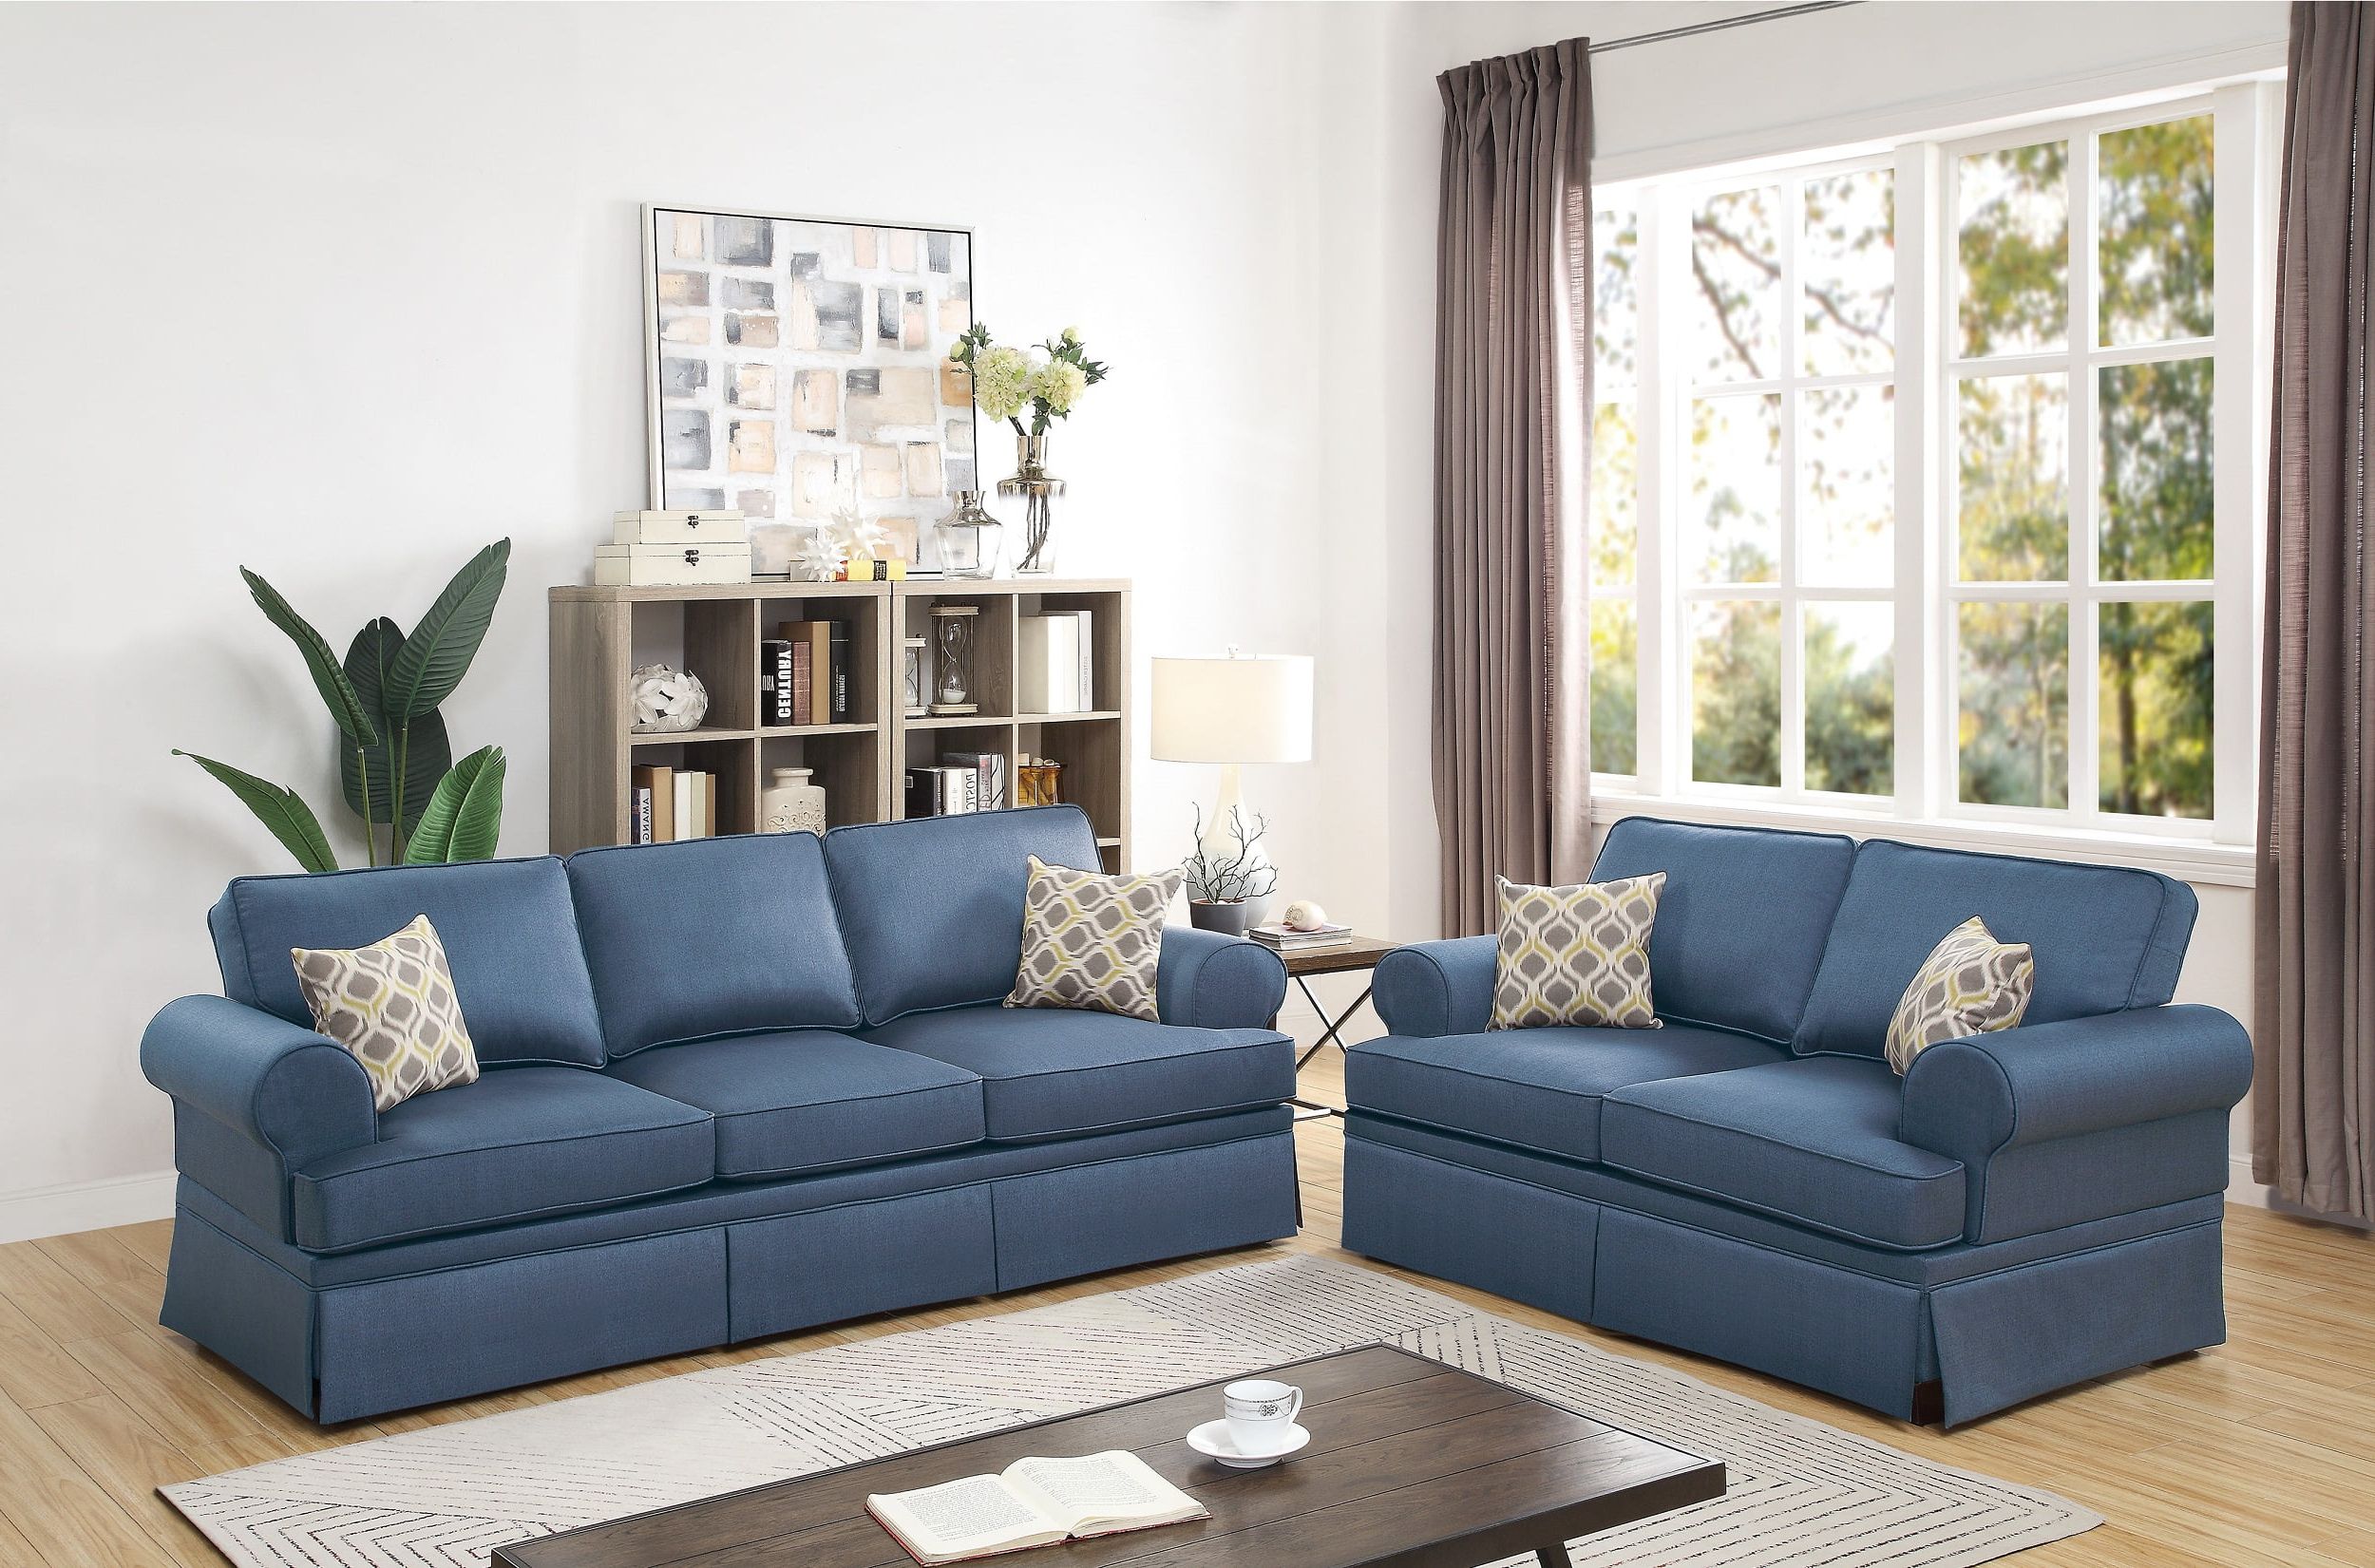 Fashionable Sofas In Blue Intended For Classic Comfort Cozy Living Room 2pc Sofa Set Sofa And Loveseat Blue (View 5 of 15)